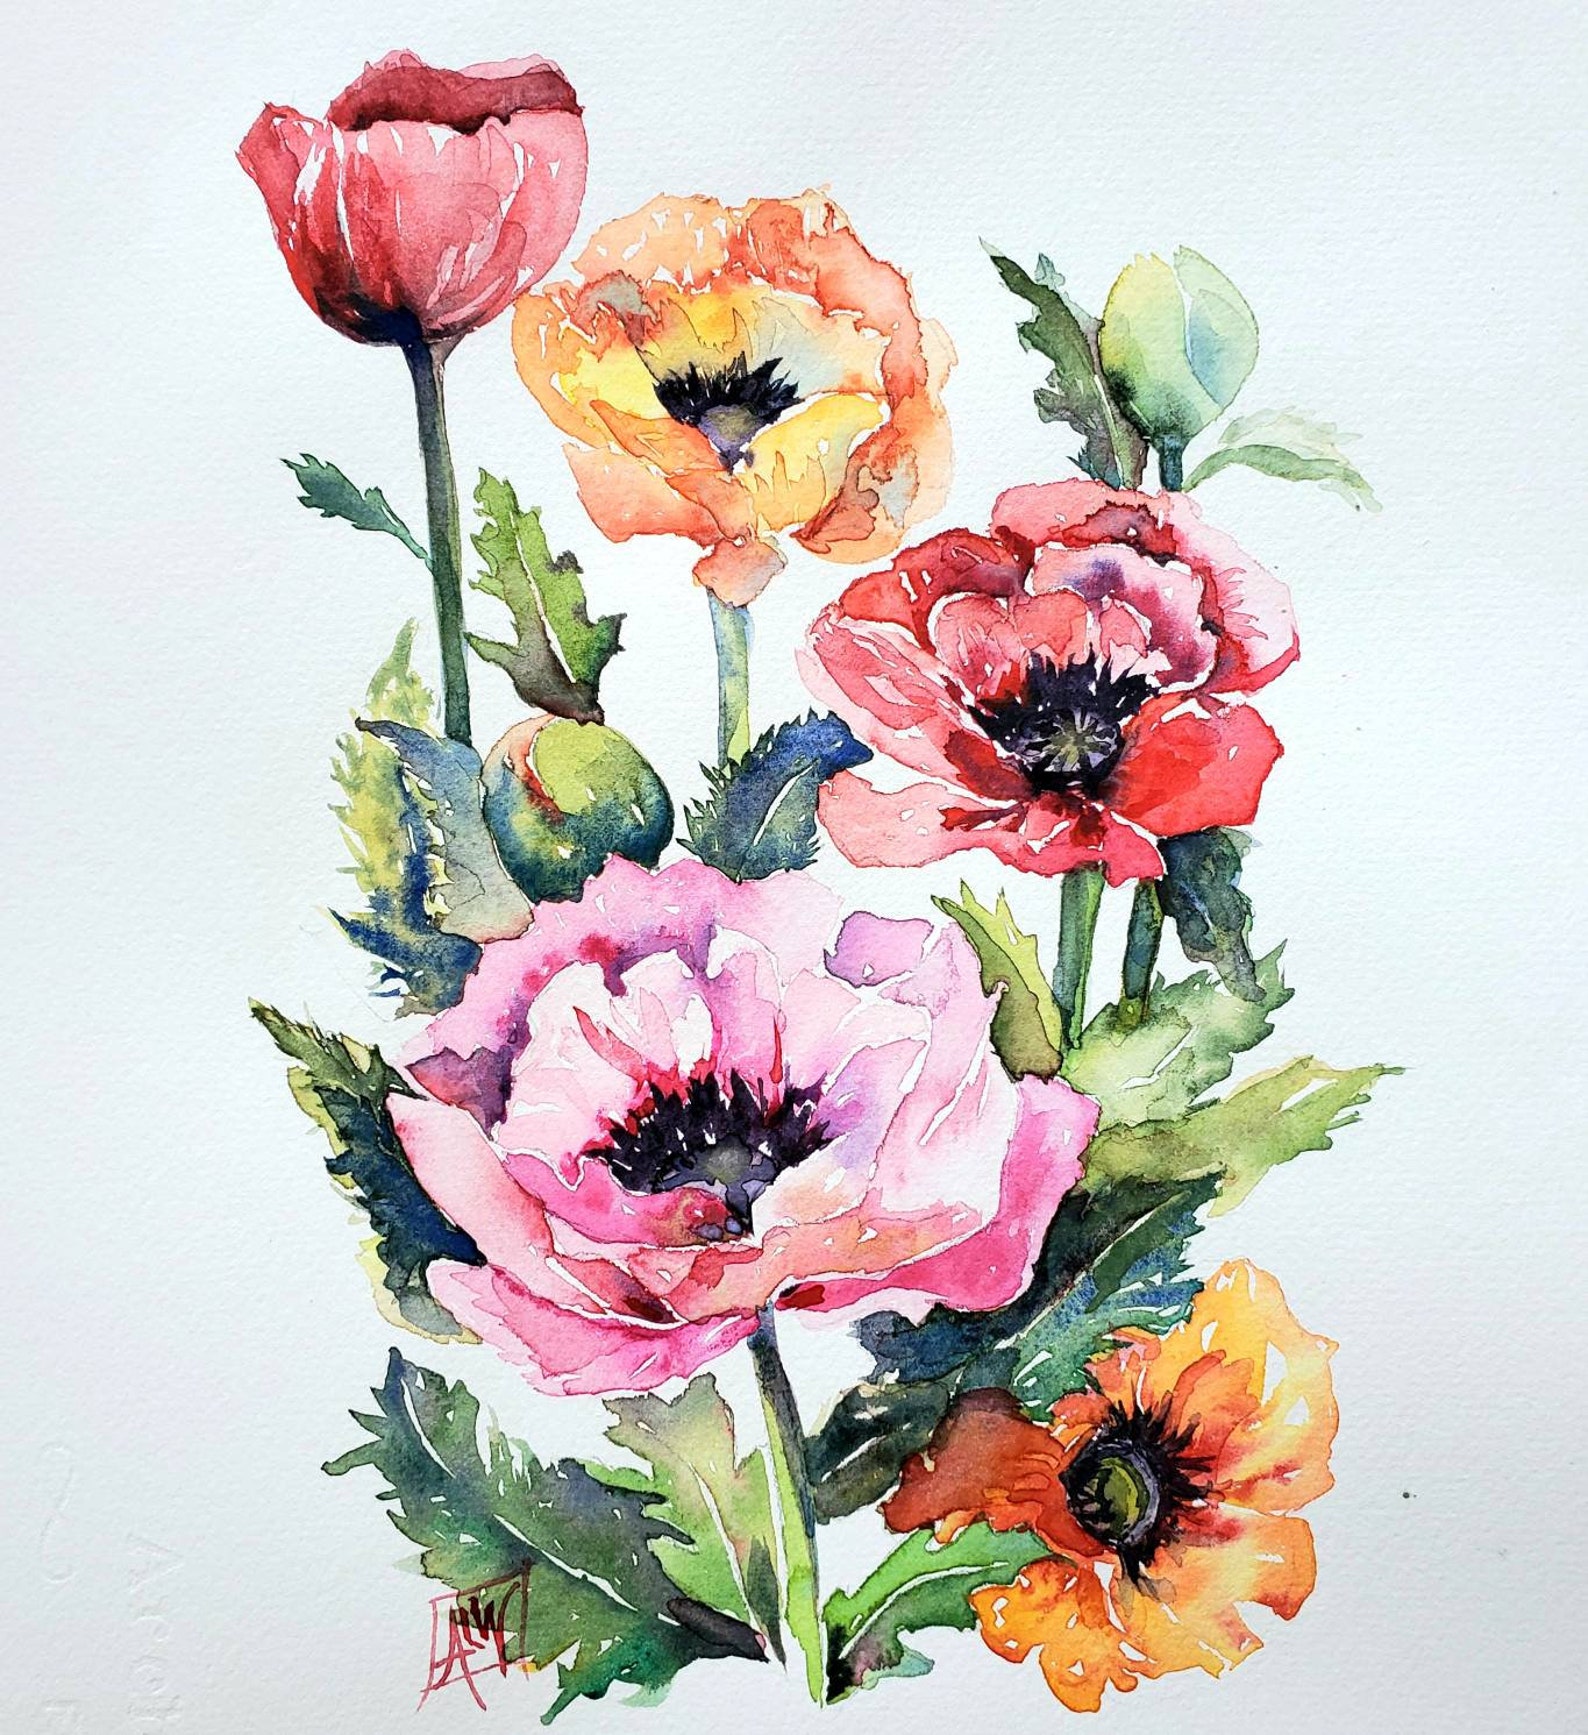 Oriental Poppies Original Watercolor Painting 9 x 12 inches | Etsy